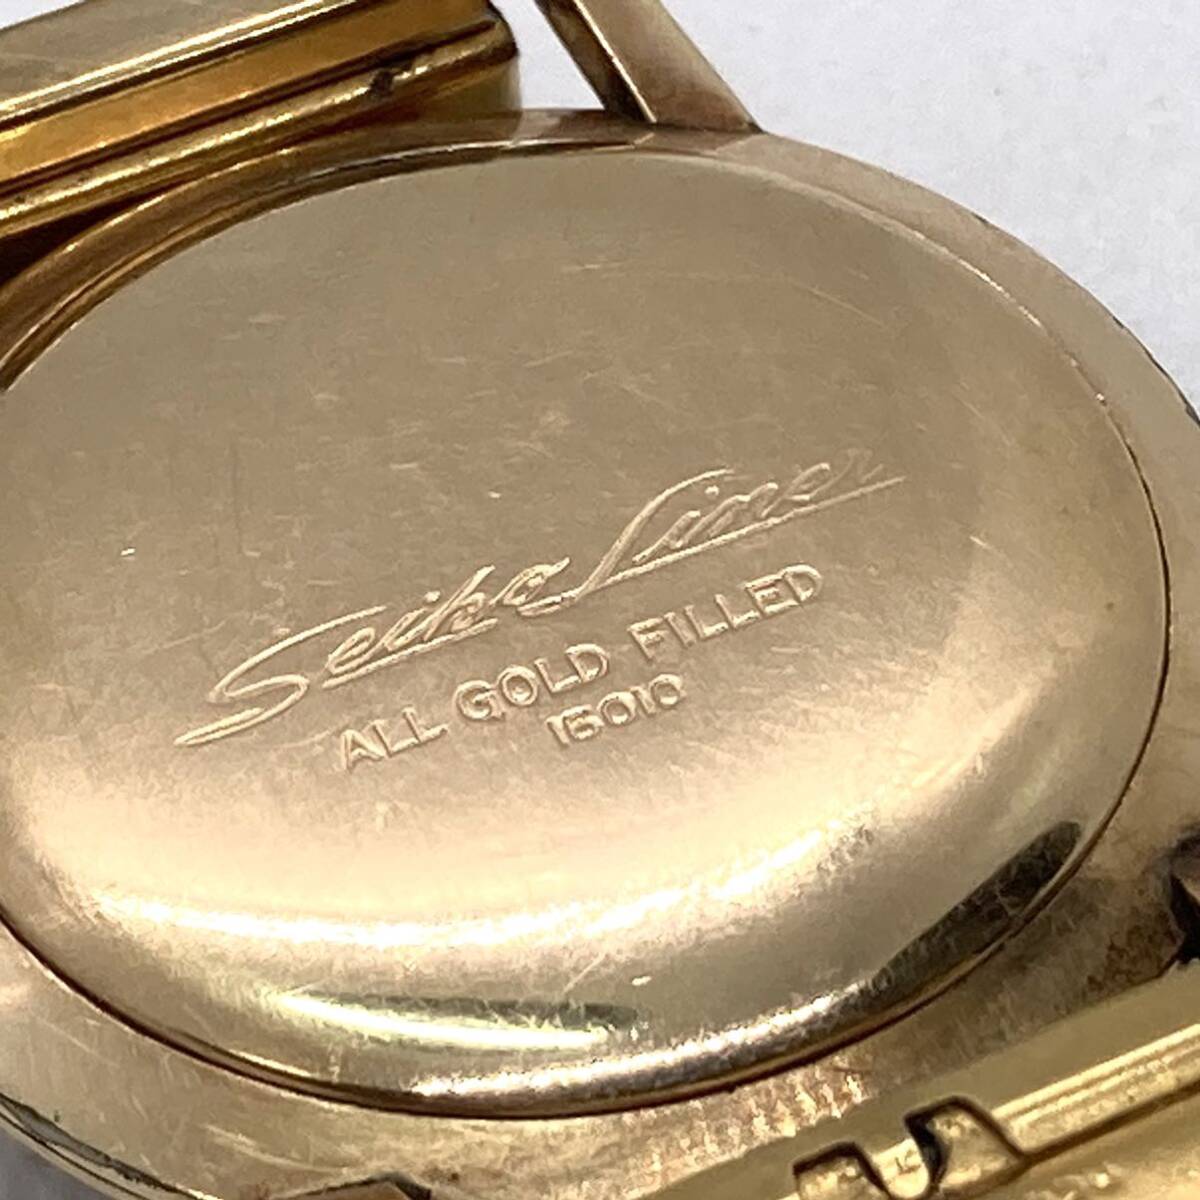 SEIKO　LINER　15010　Cal.3140　23石　手巻　ALL GOLD FILLED　3針　渦巻　希少　メンズ　ヴィンテージ　時計　セイコー　ライナー　_画像9